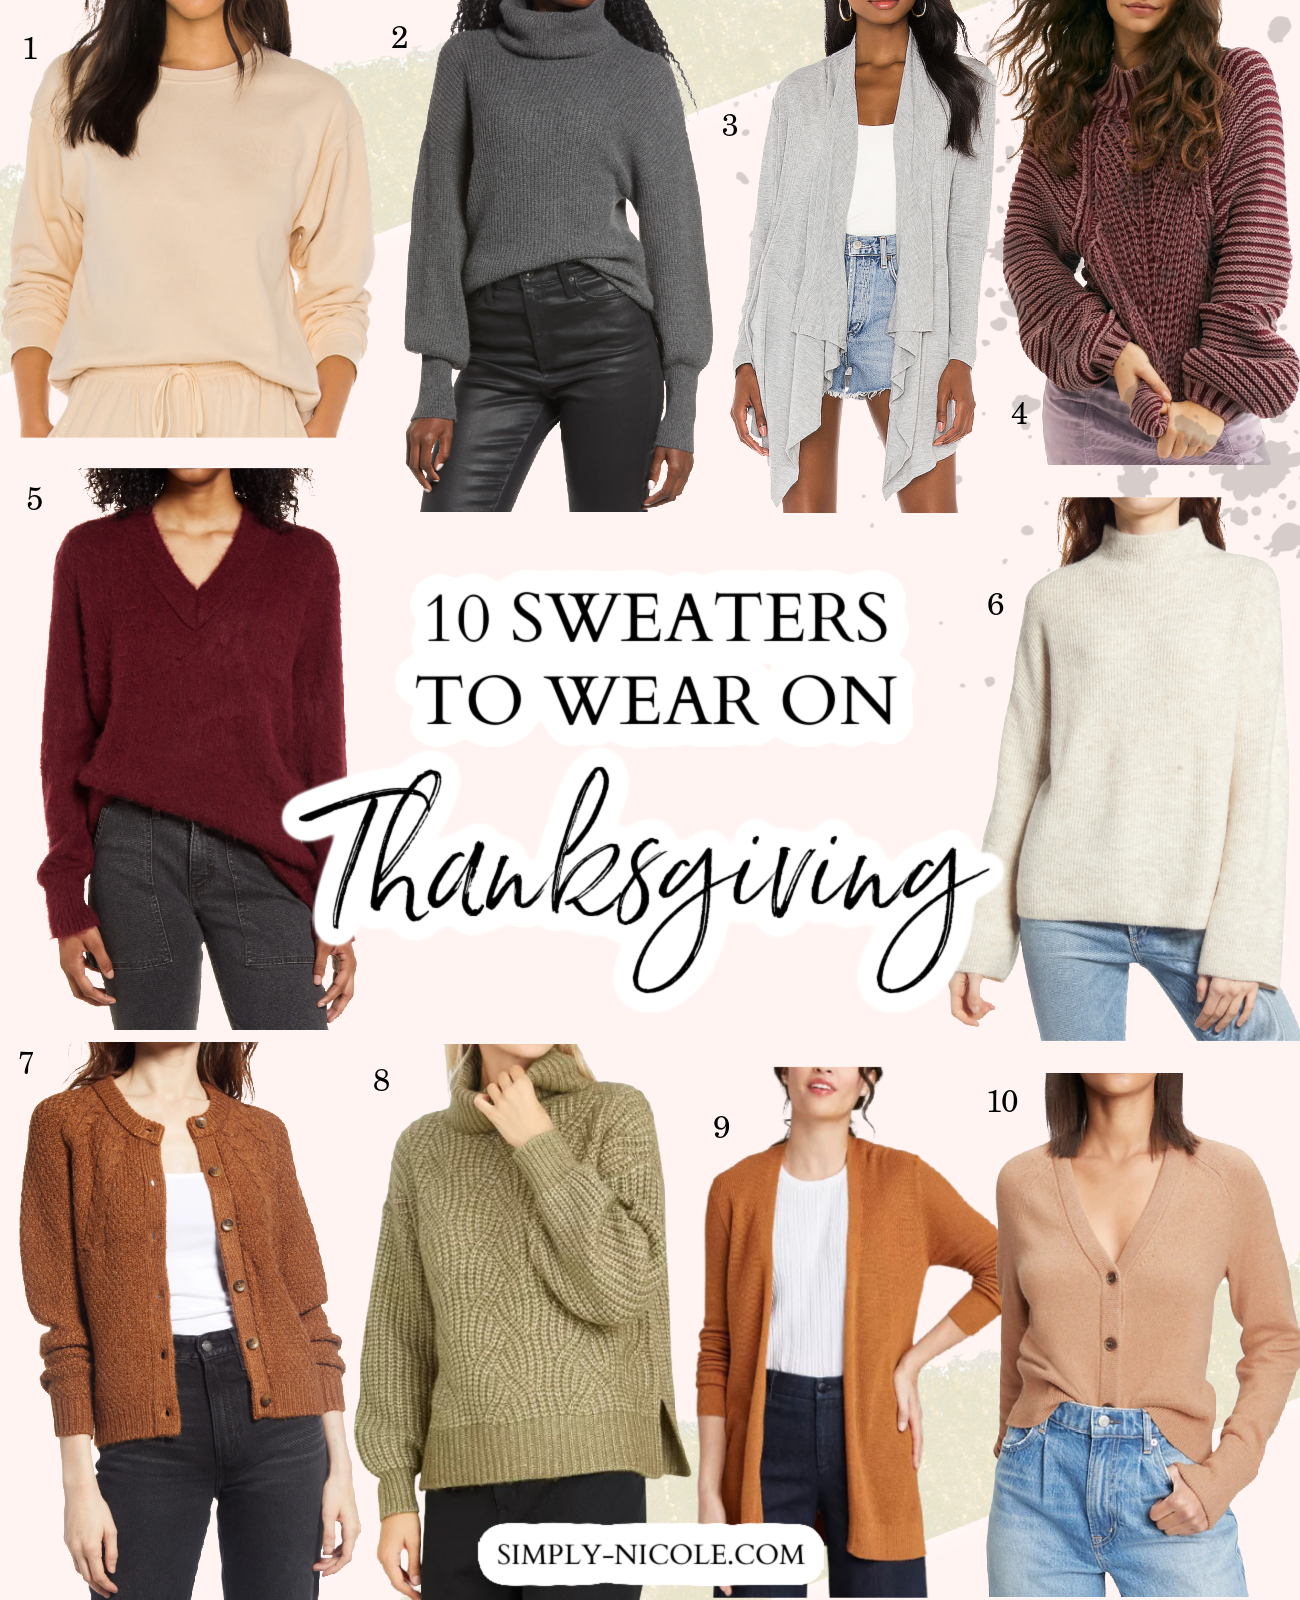 Sweaters to Wear on Thanksgiving